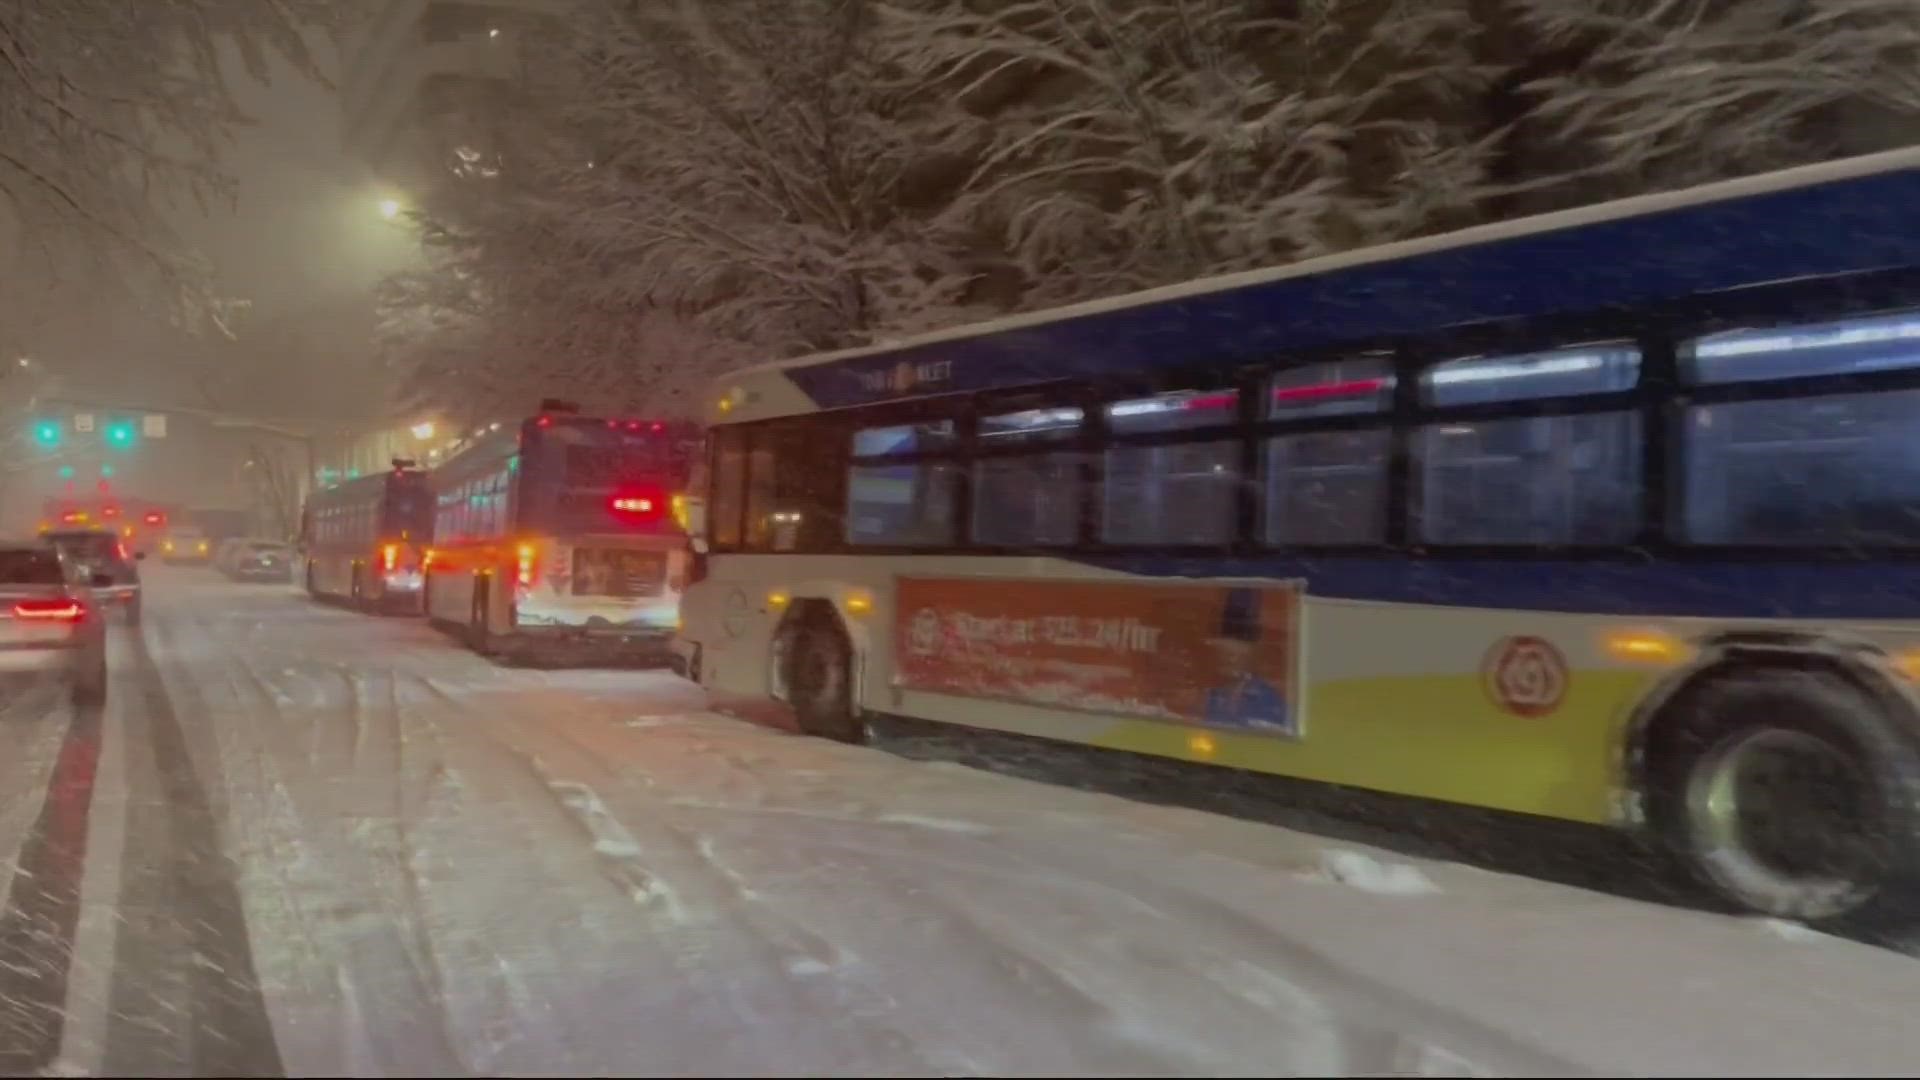 More than 100 buses got stuck on the roads in Portland since snow began falling Wednesday, TriMet said.